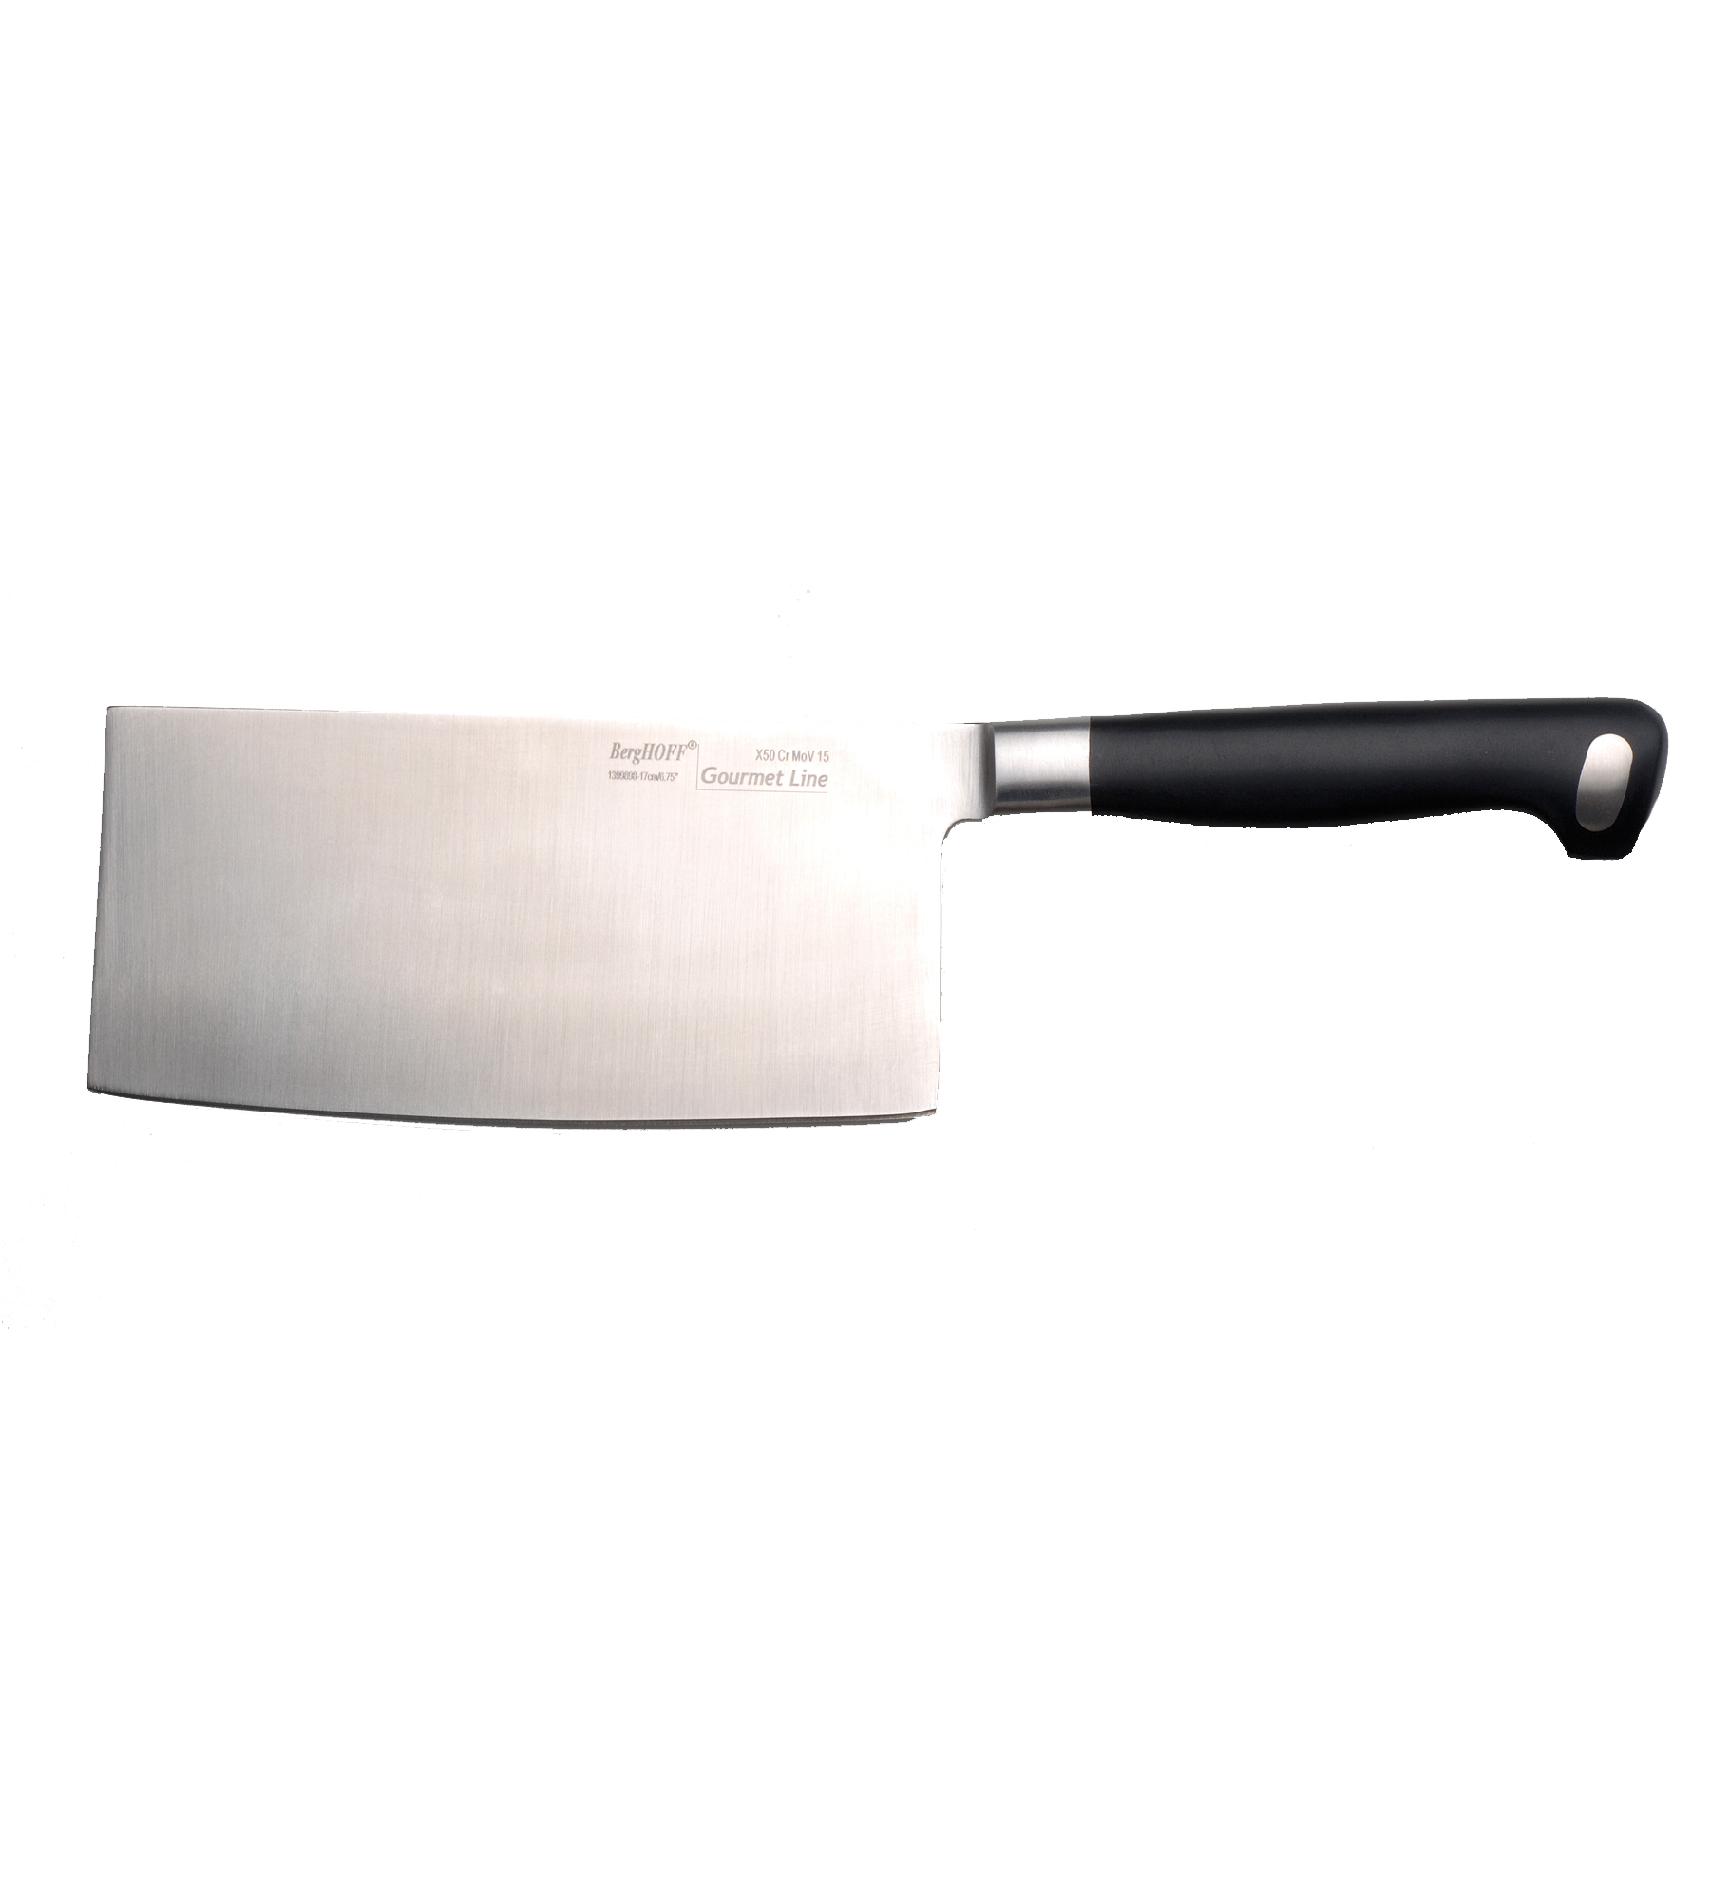 Gourmet Line 6.75" Chinese Cleaver